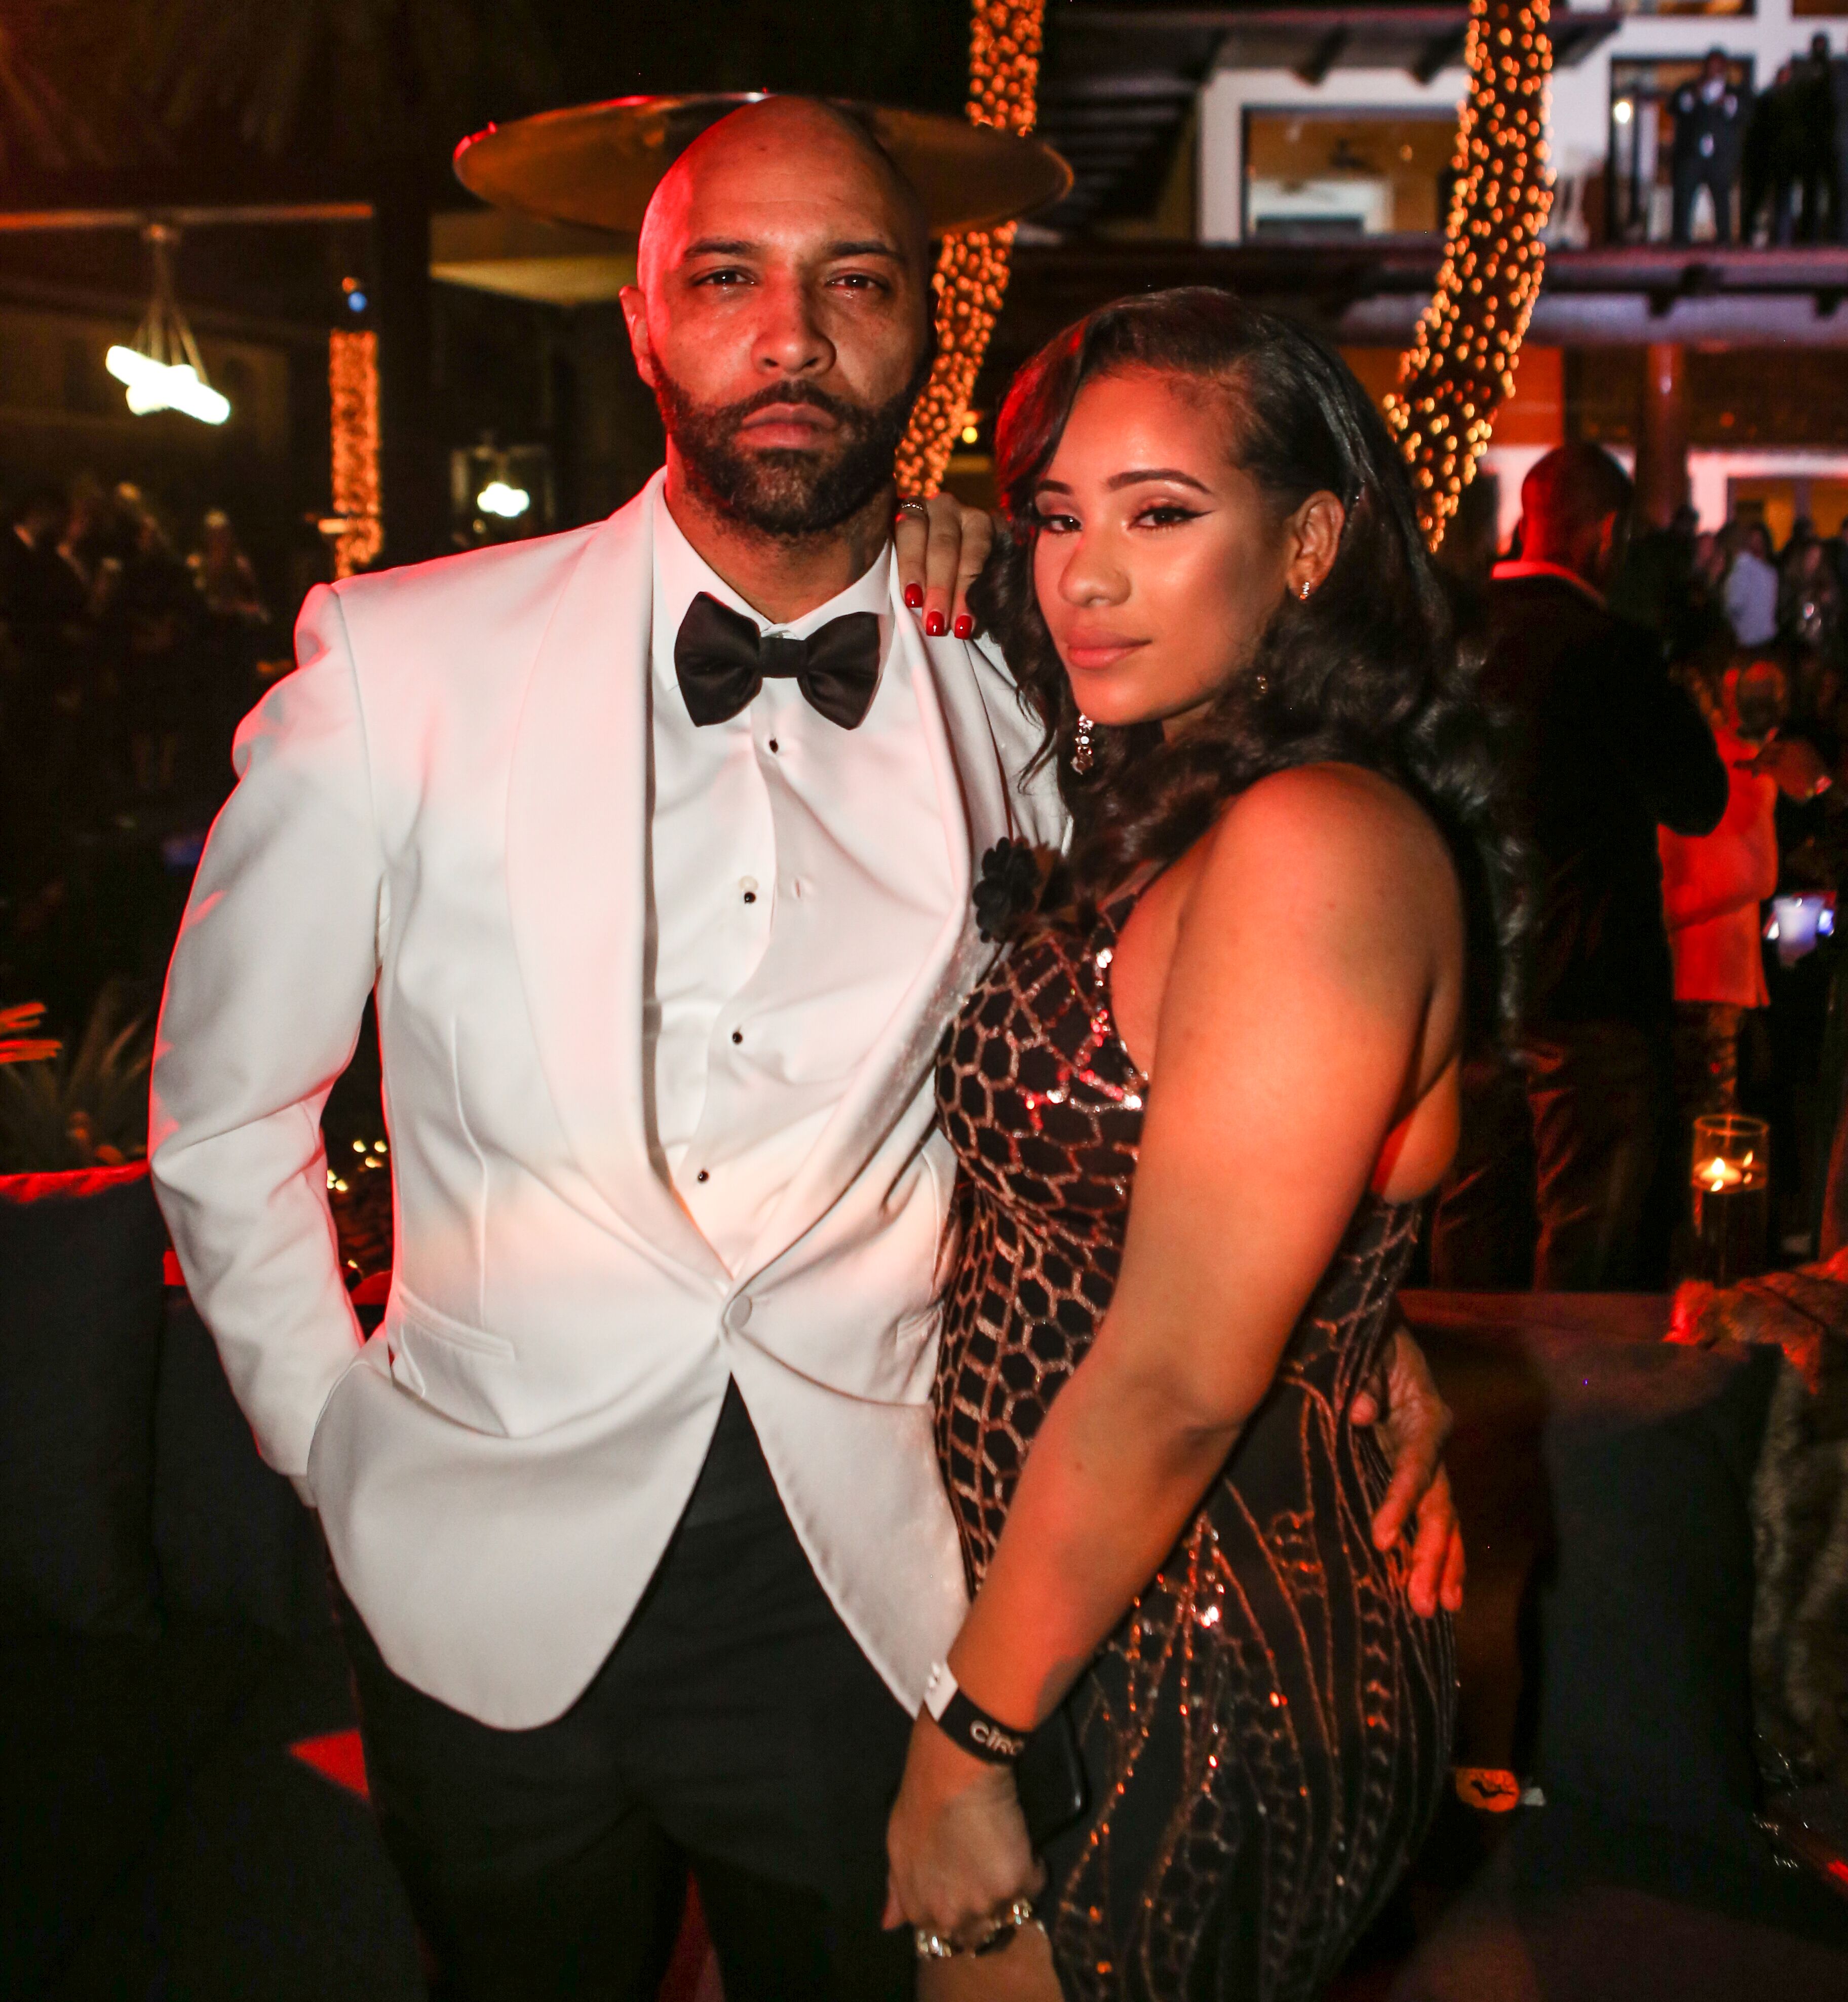 Joe Budden and Cyn Santana attend Sean 'Diddy' Combs Hosts CIROC The New Year 2018 Powered By Deleon Tequila at Star Island on December 31, 2017 in Miami, Florida. | Photo: Getty Images